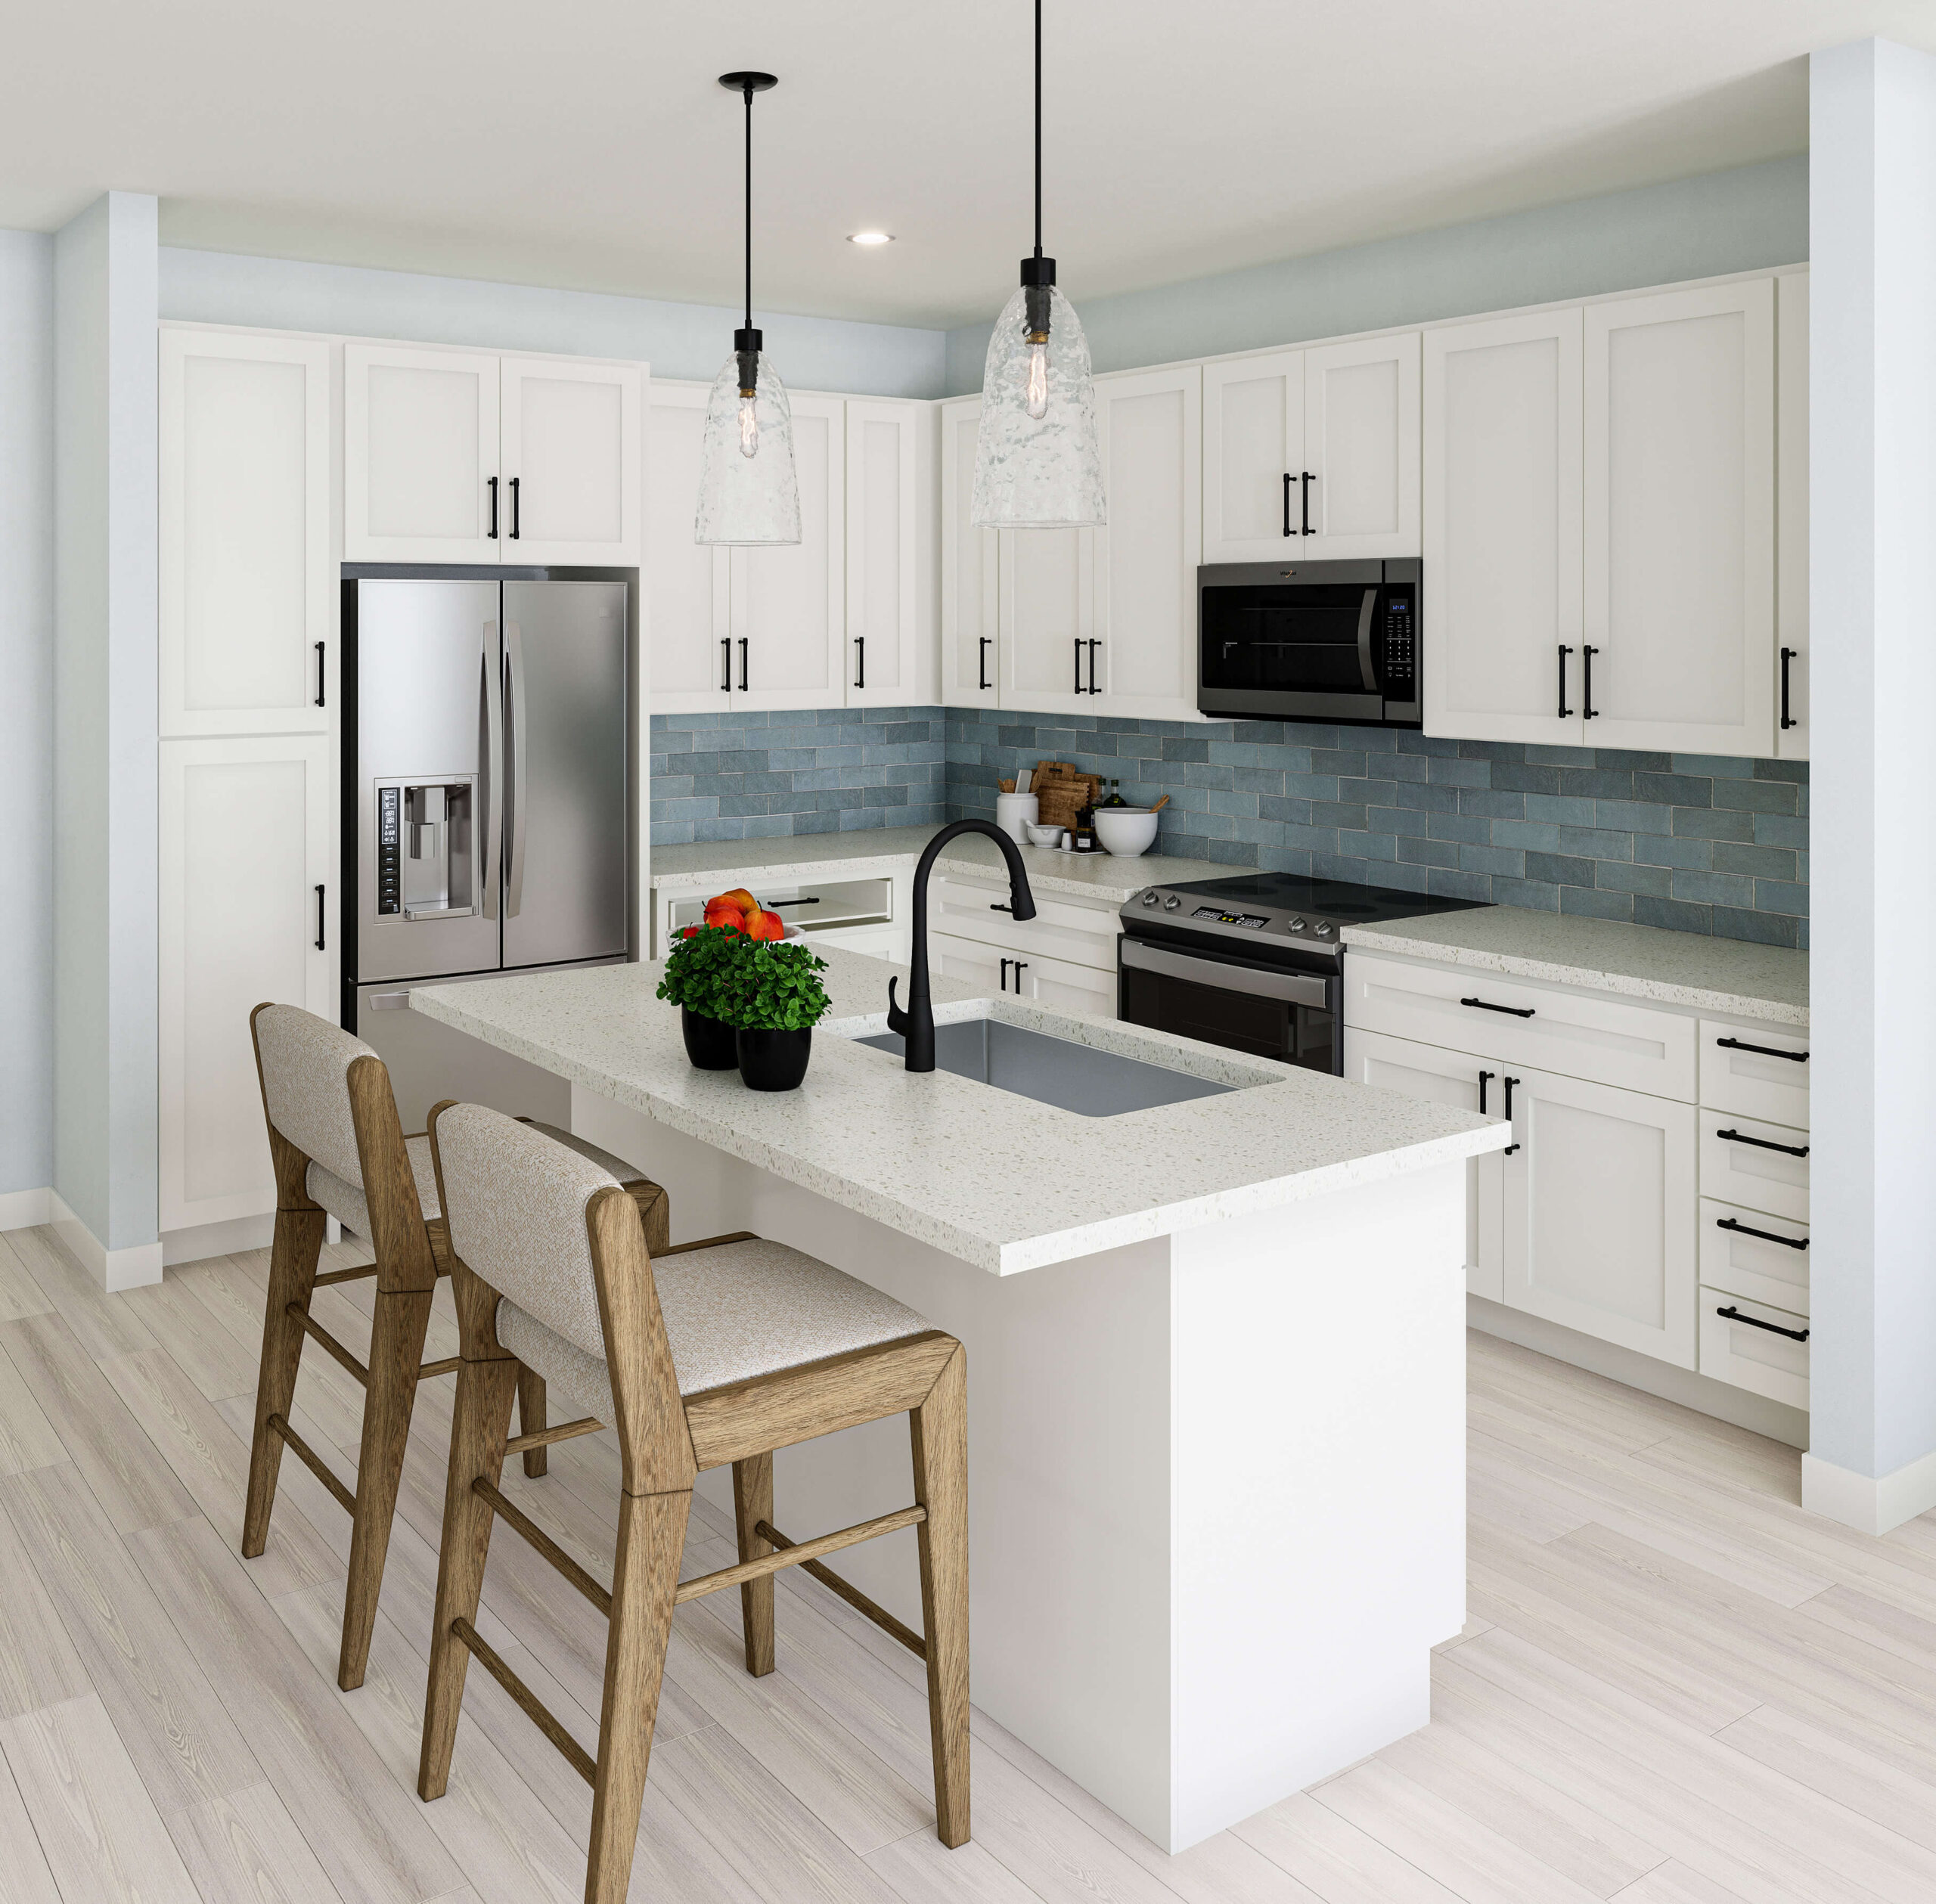 Luxury apartment kitchen with island, chairs, white countertops, cabinets and stainless steel appliances on plank flooring.